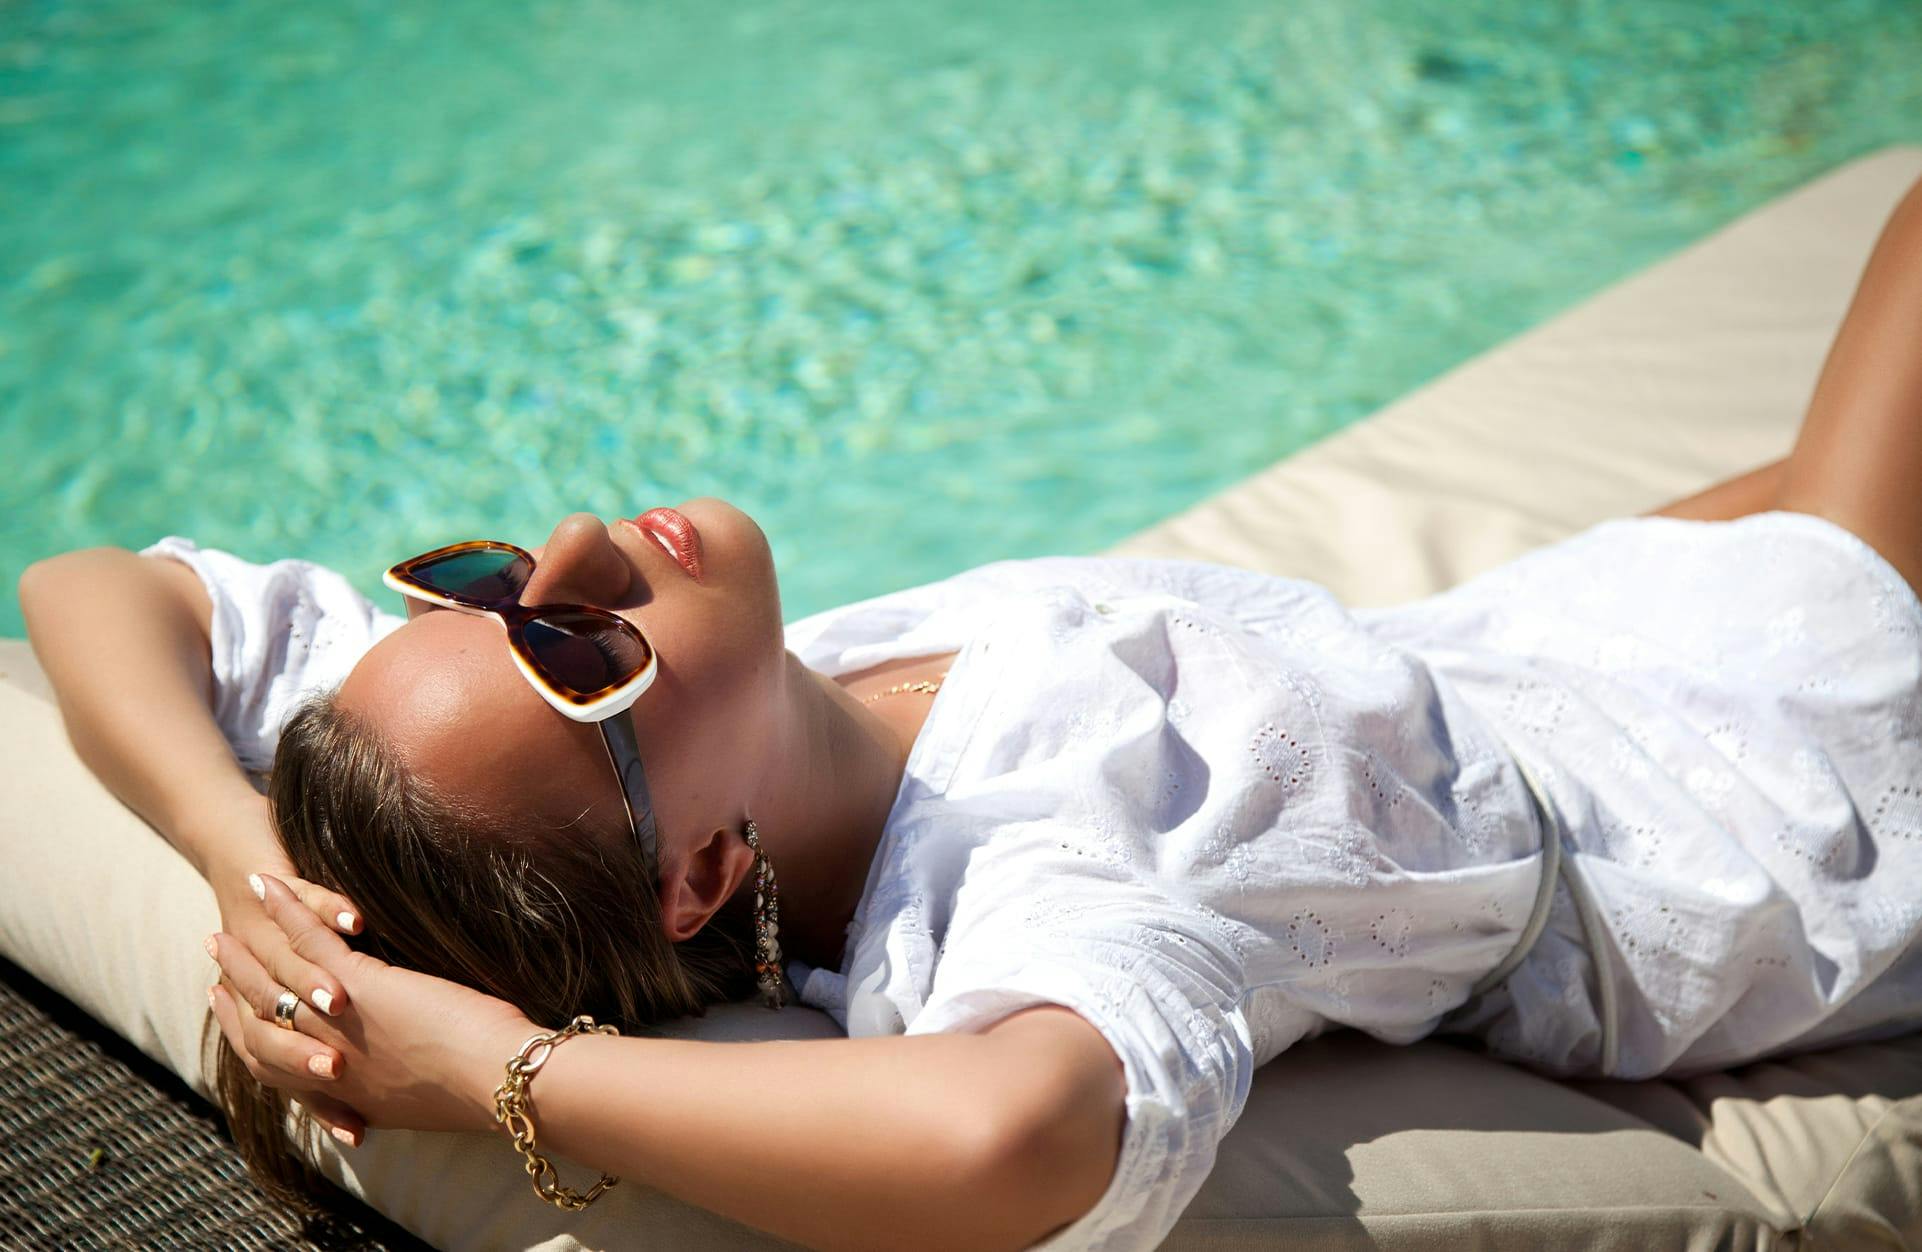 brunette woman laying outside by the pool in sunglasses and a white dress